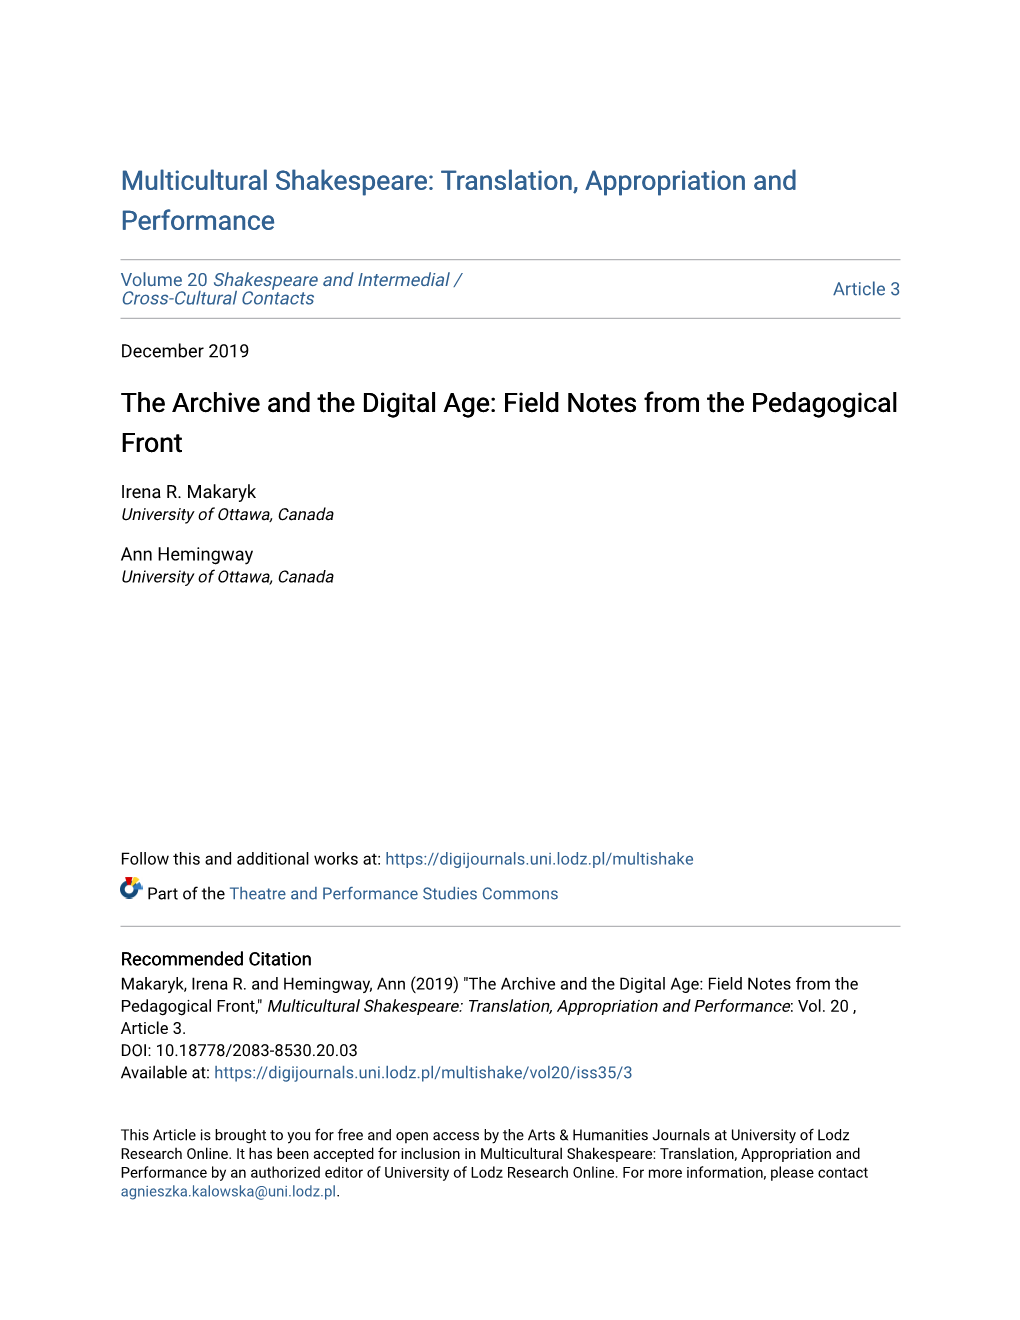 Field Notes from the Pedagogical Front